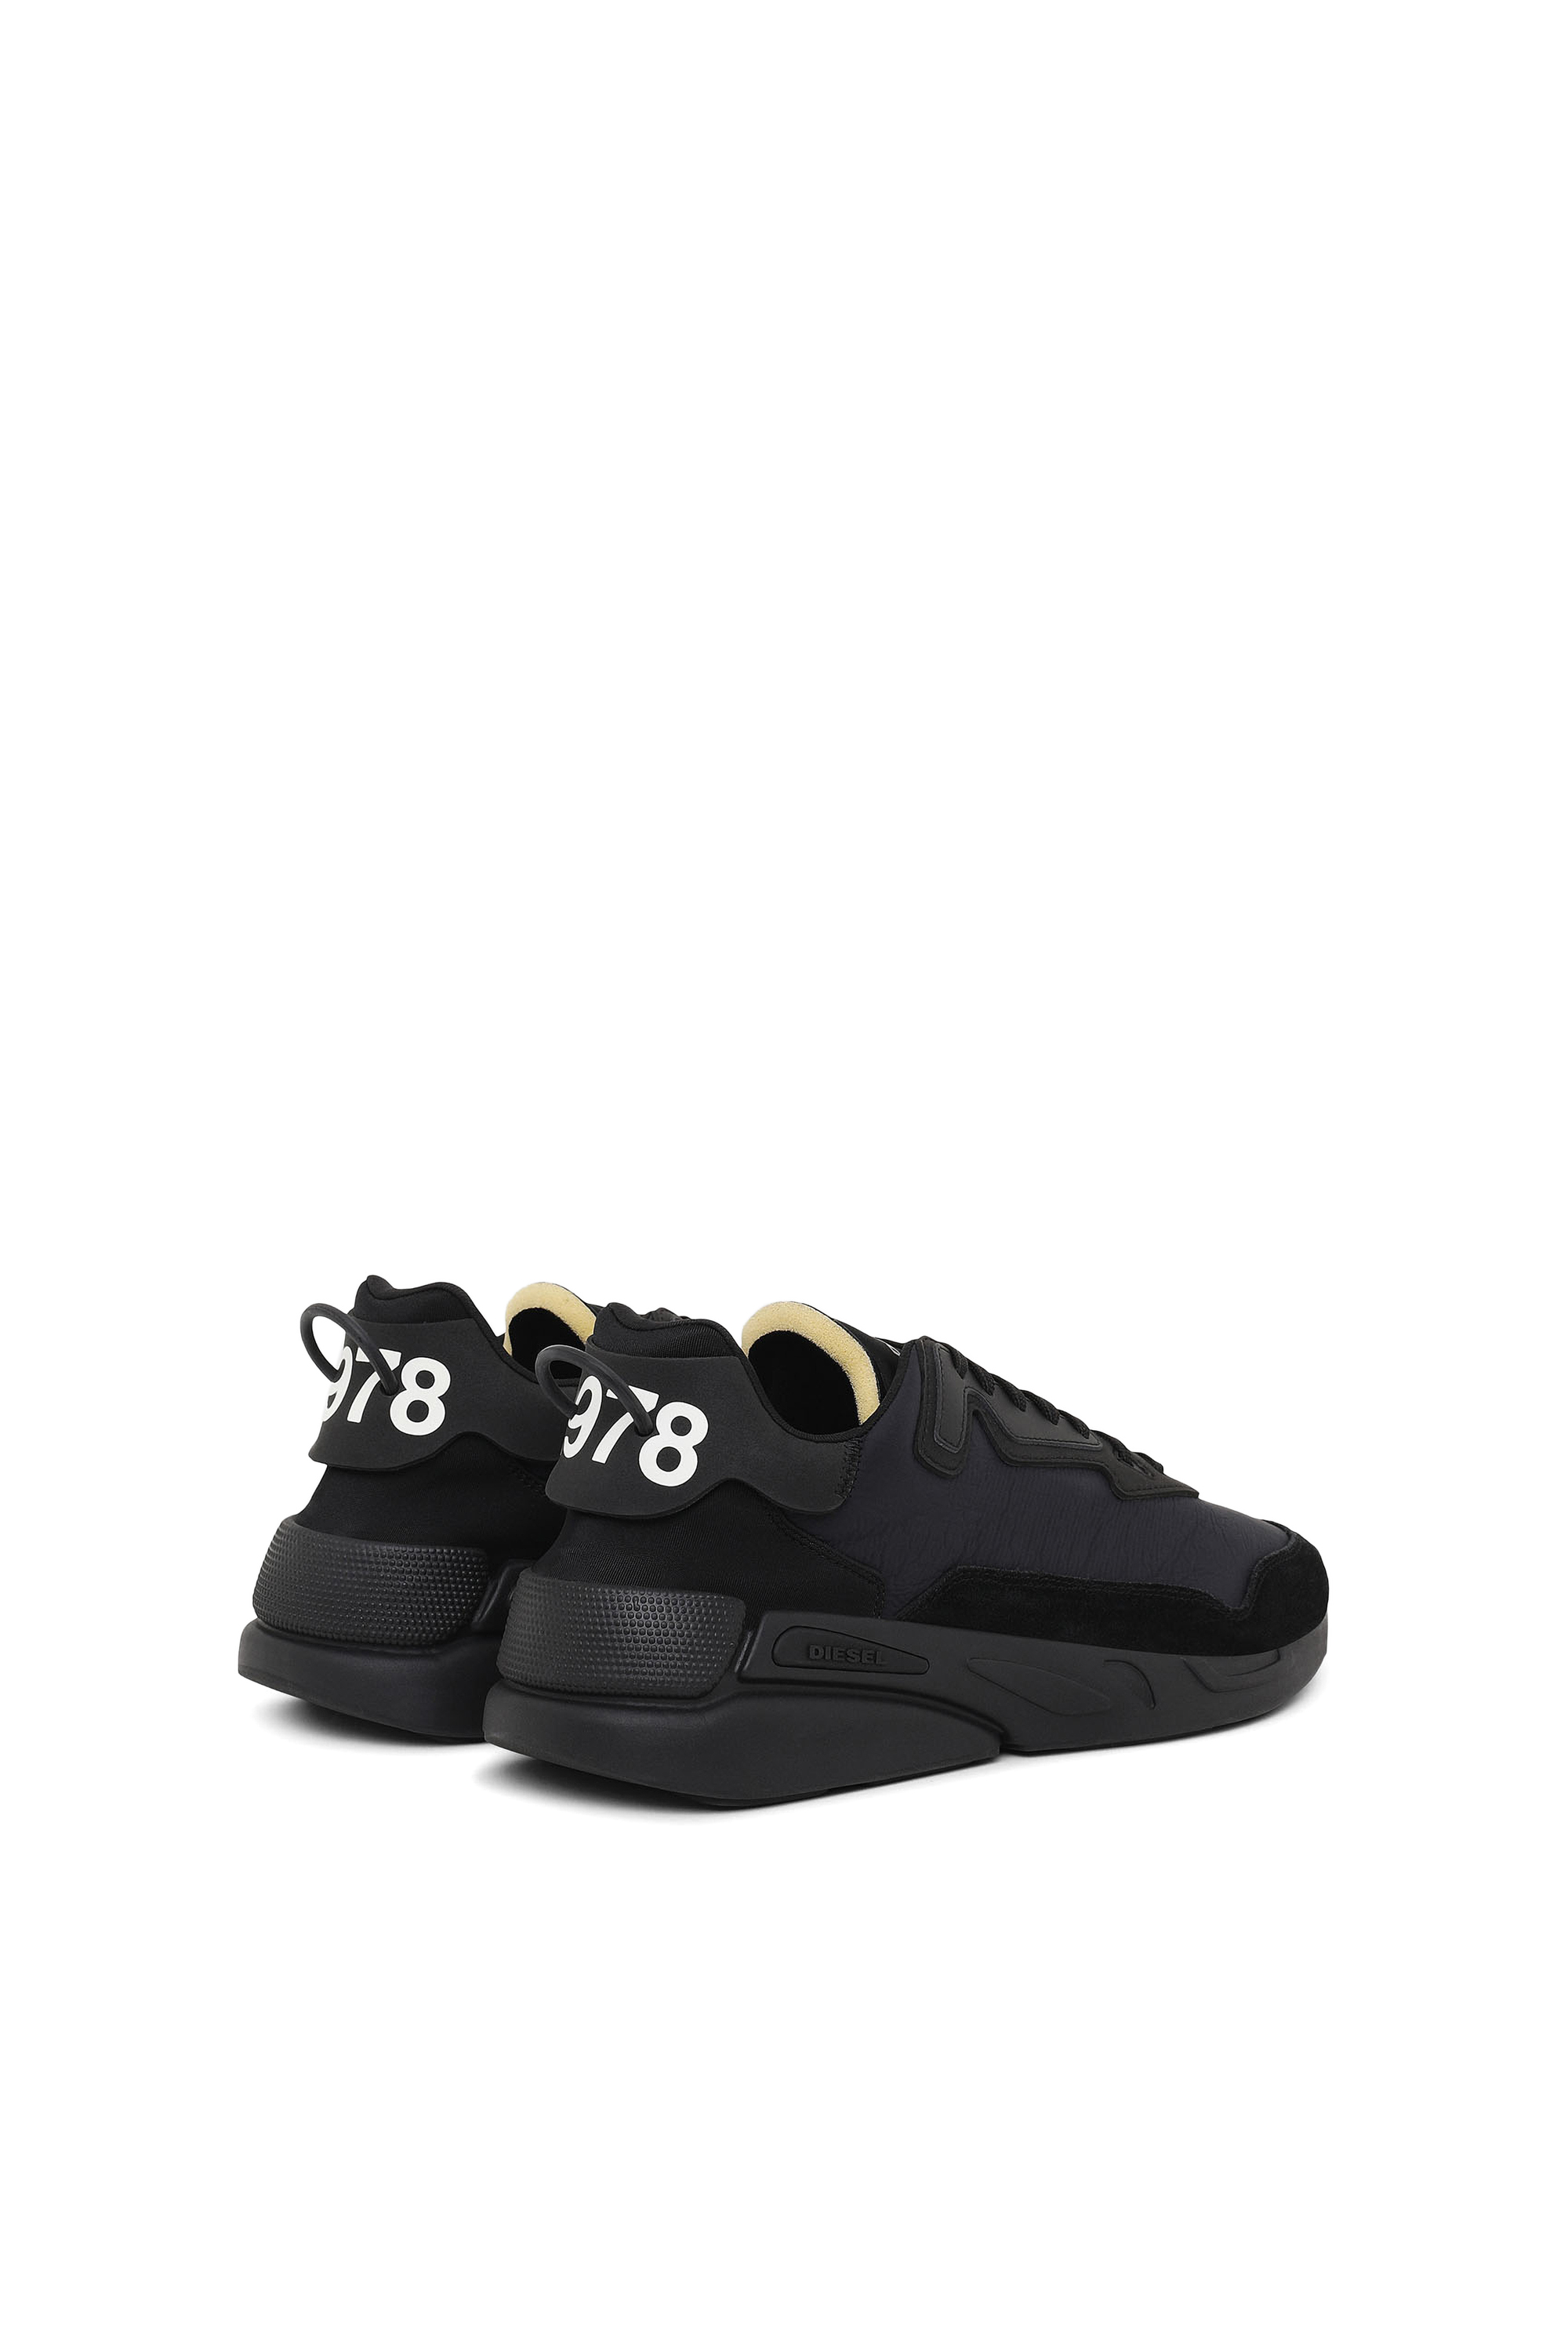 S-SERENDIPITY LC Man: Monochrome sneakers in nylon and suede | Diesel